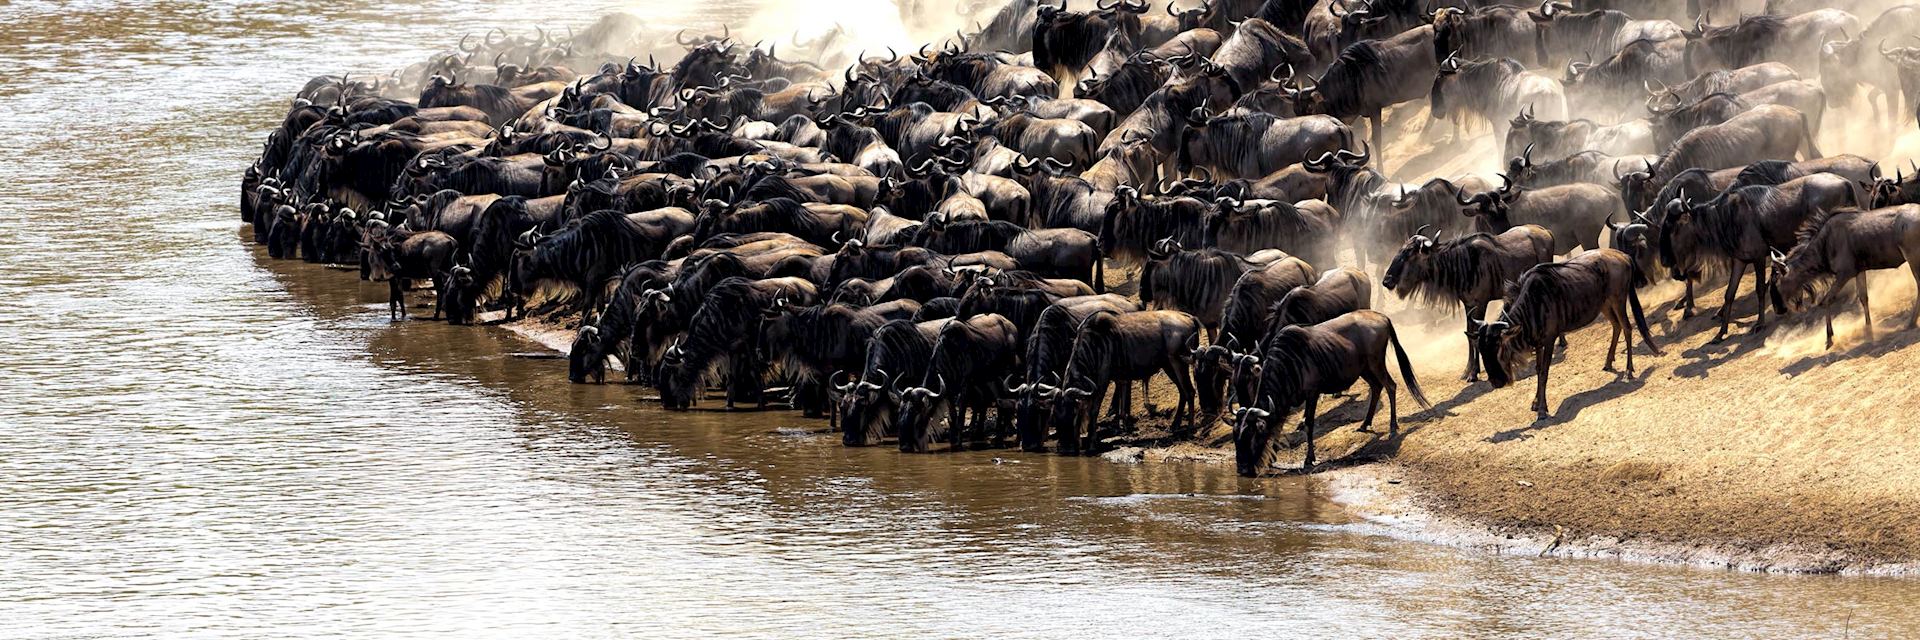 The great migration in Kenya